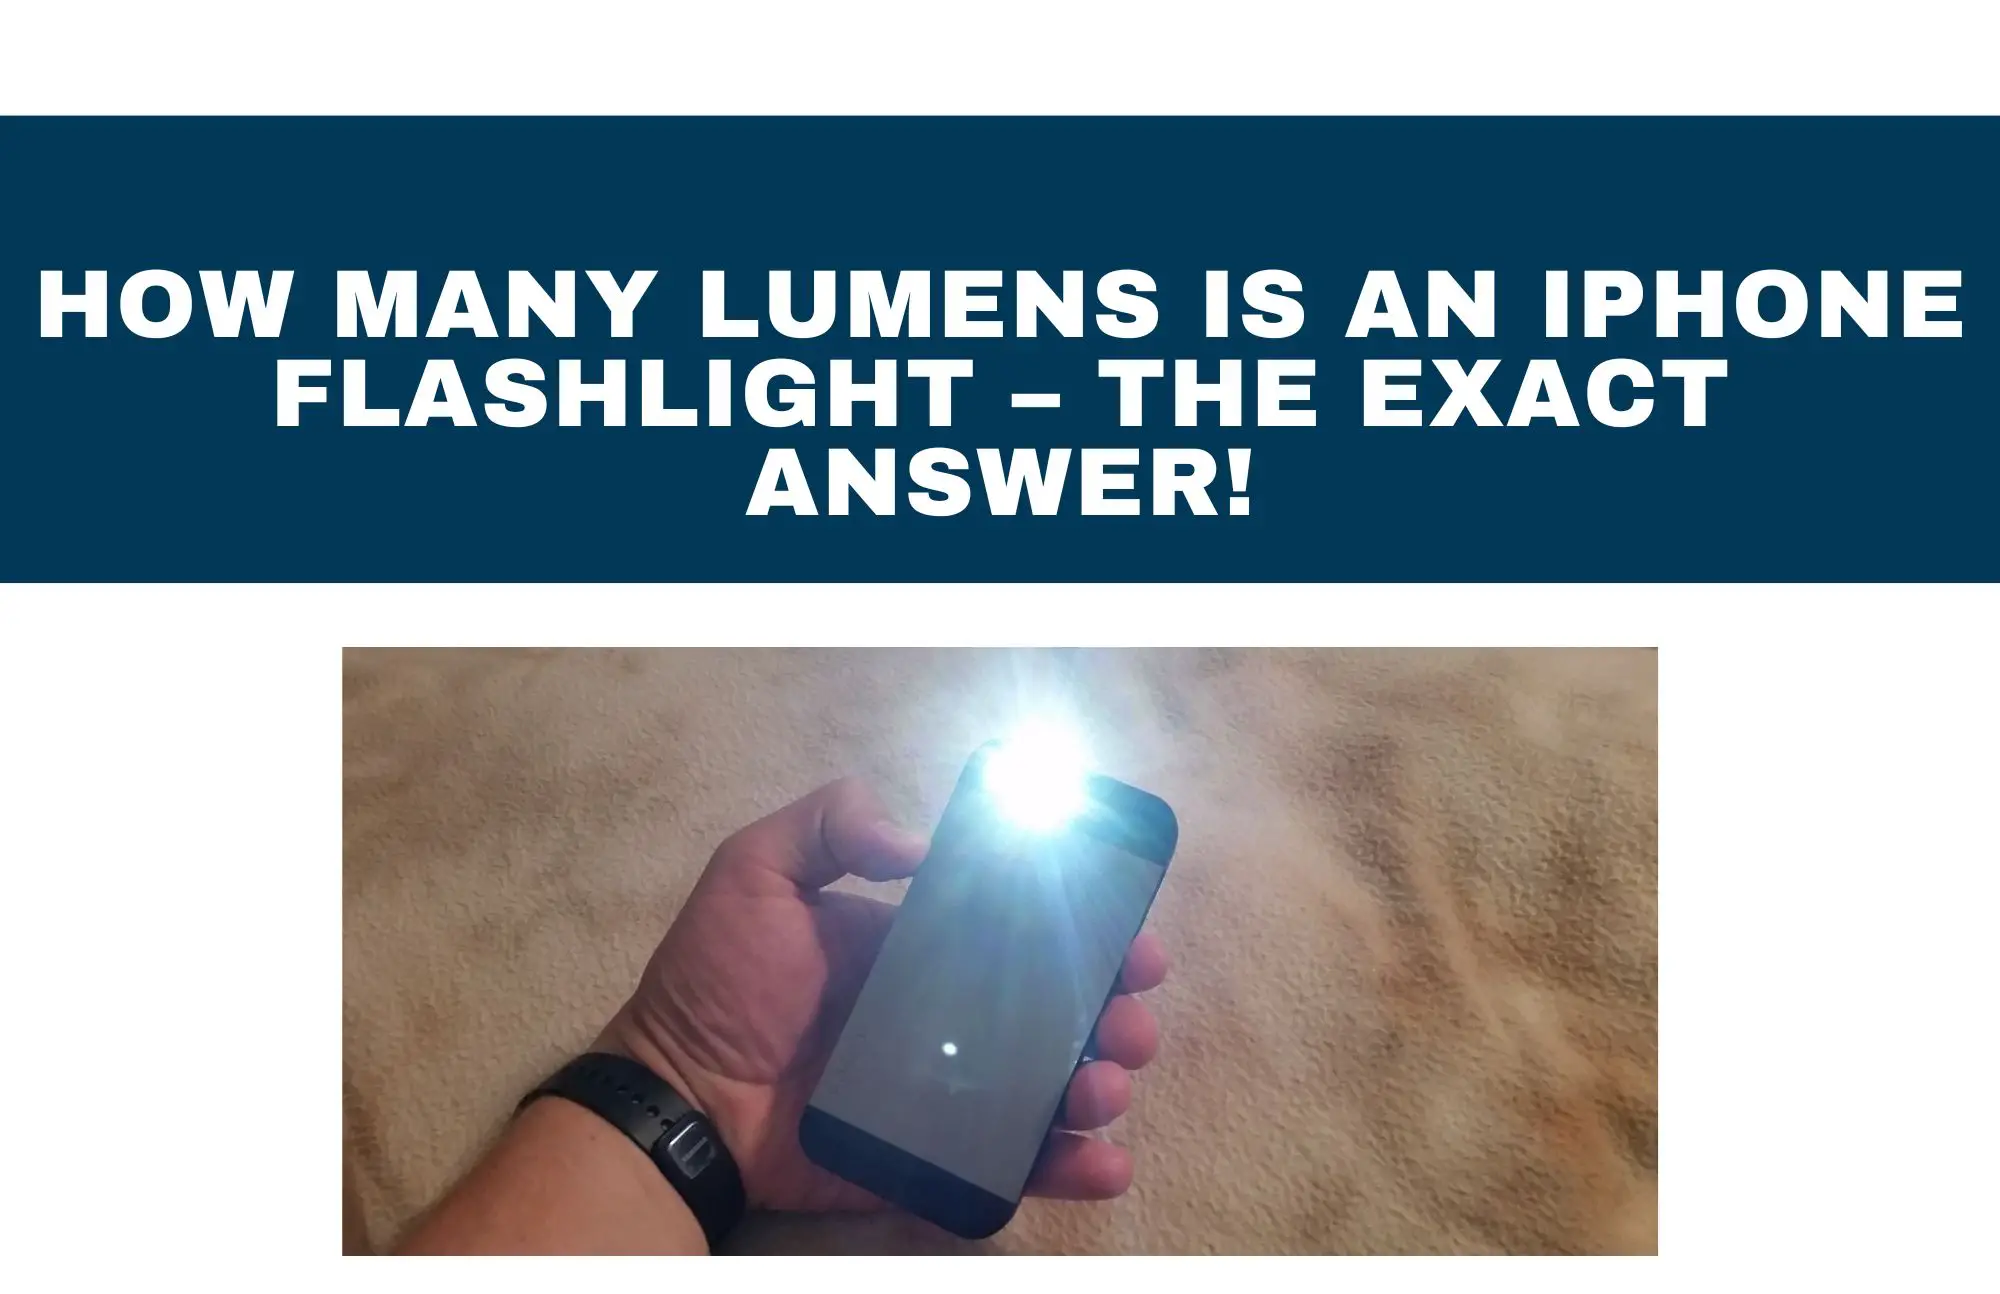 How Many Lumens Is an iPhone Flashlight